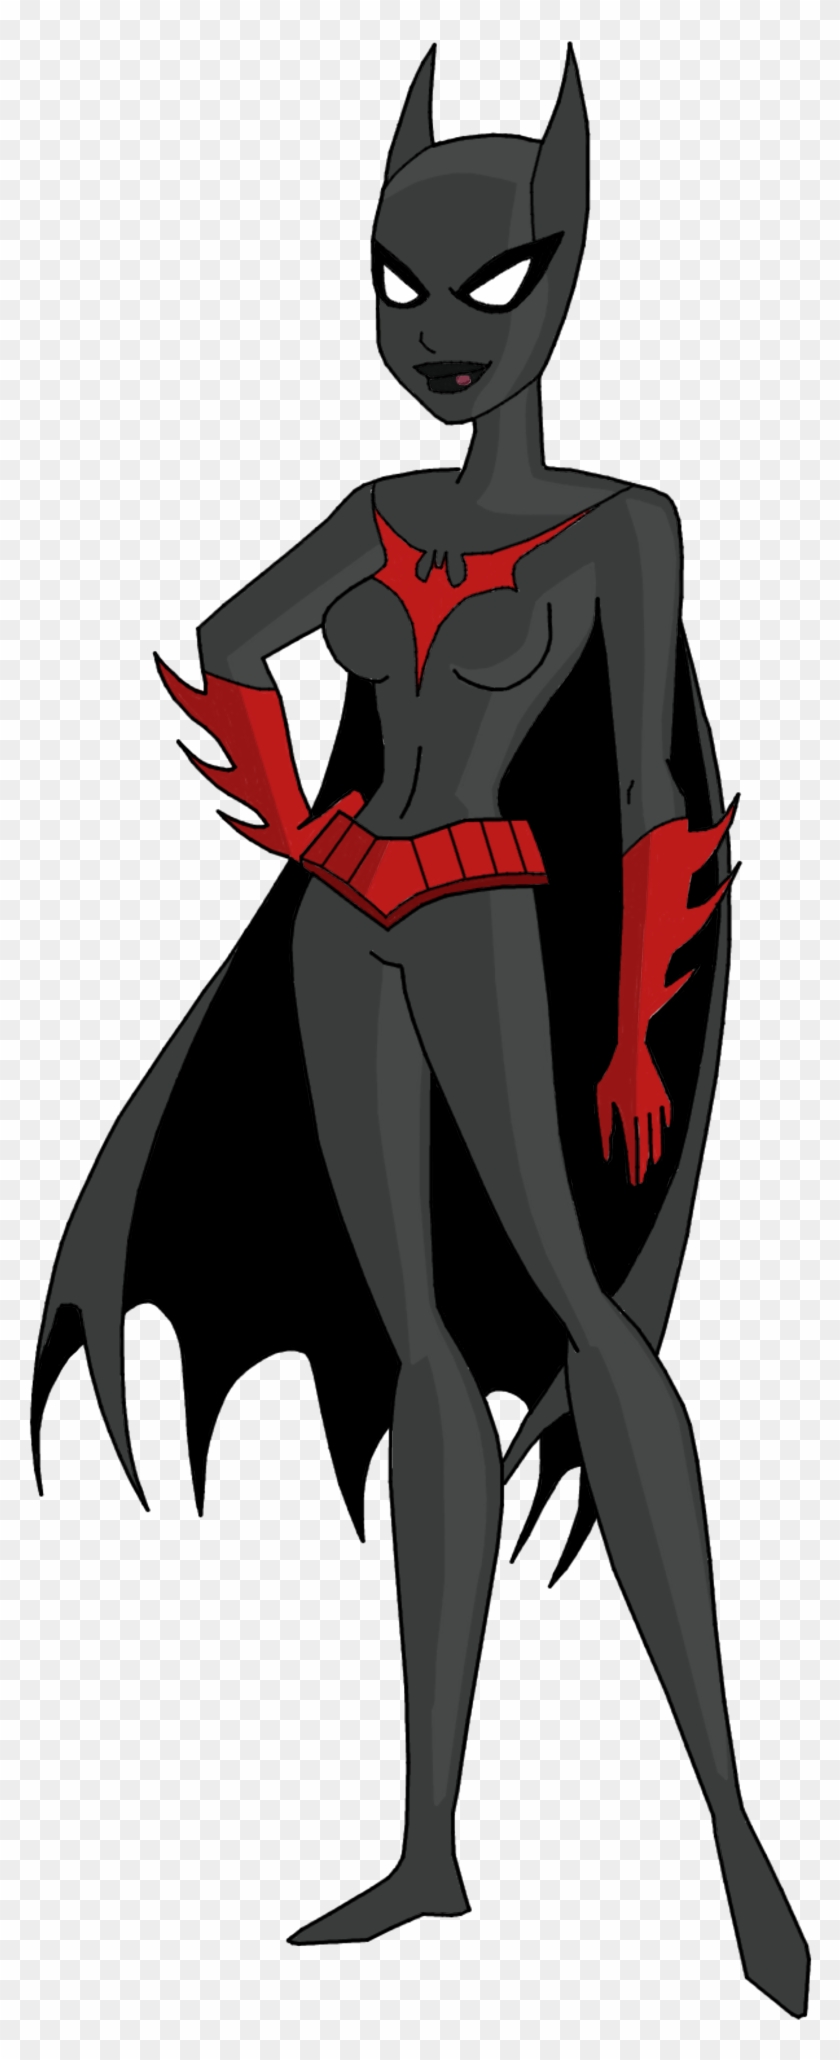 Batwoman By Therealfb1 By Therealfb1 - Justice League #1083471